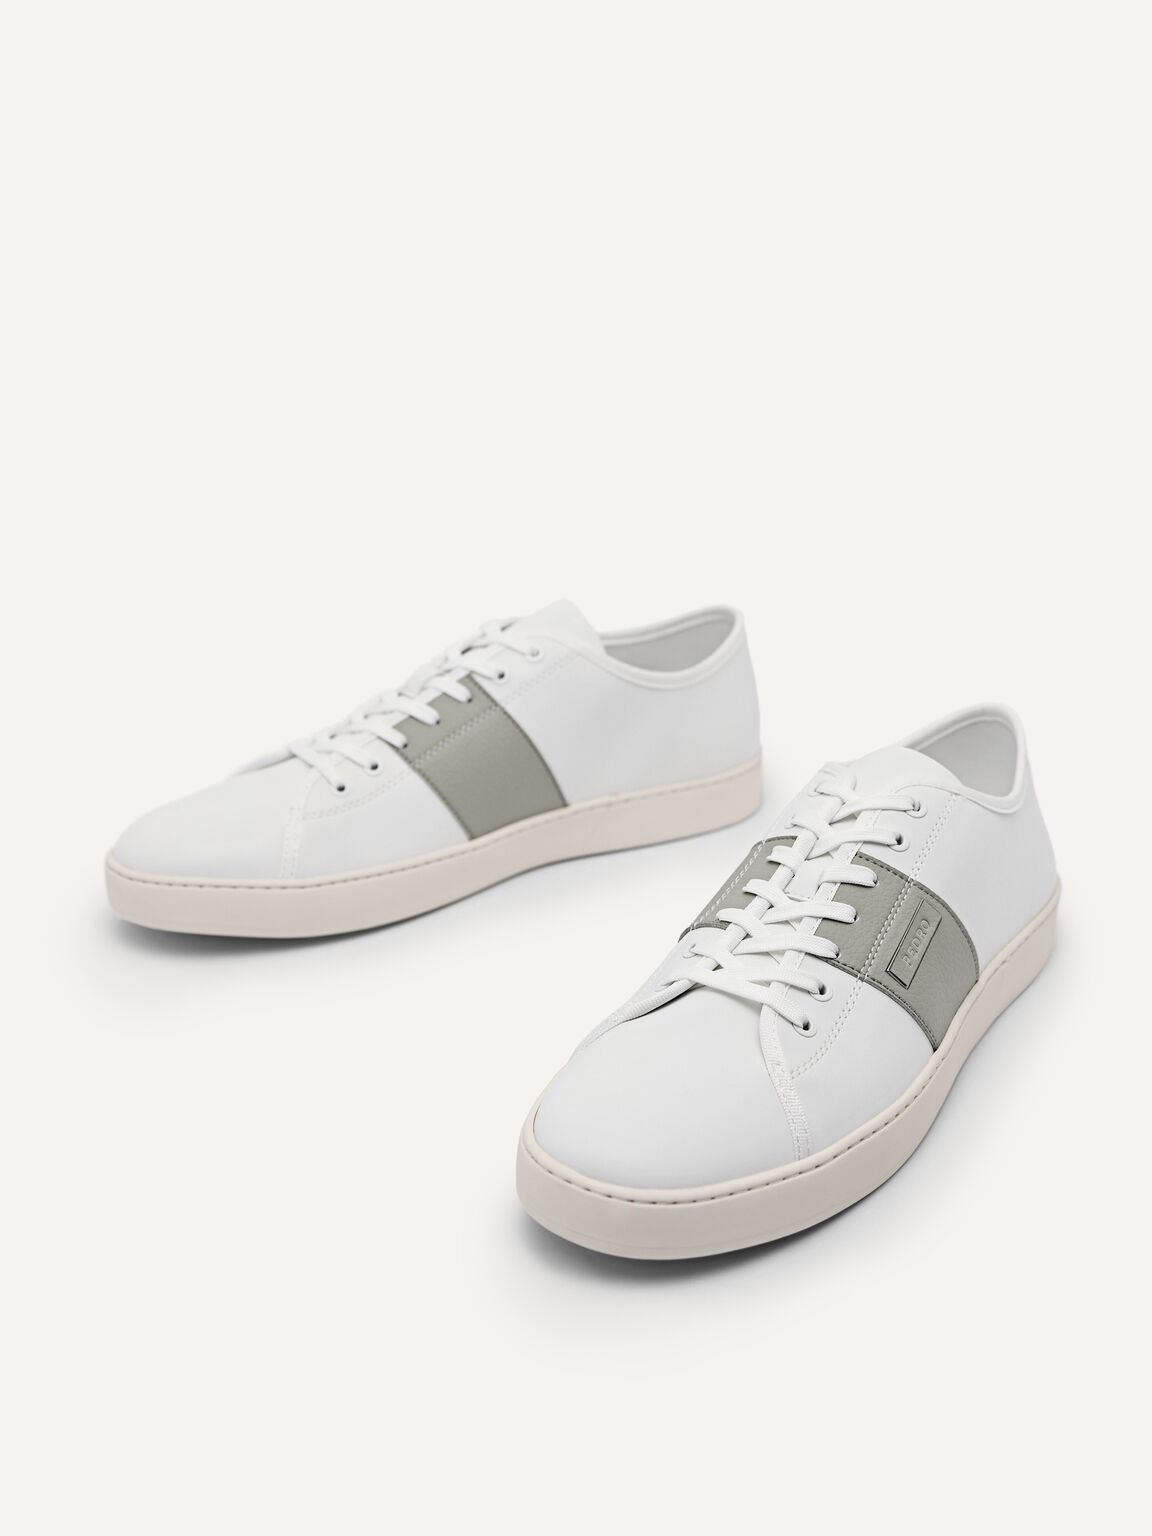 Lace-Up Sneakers, White